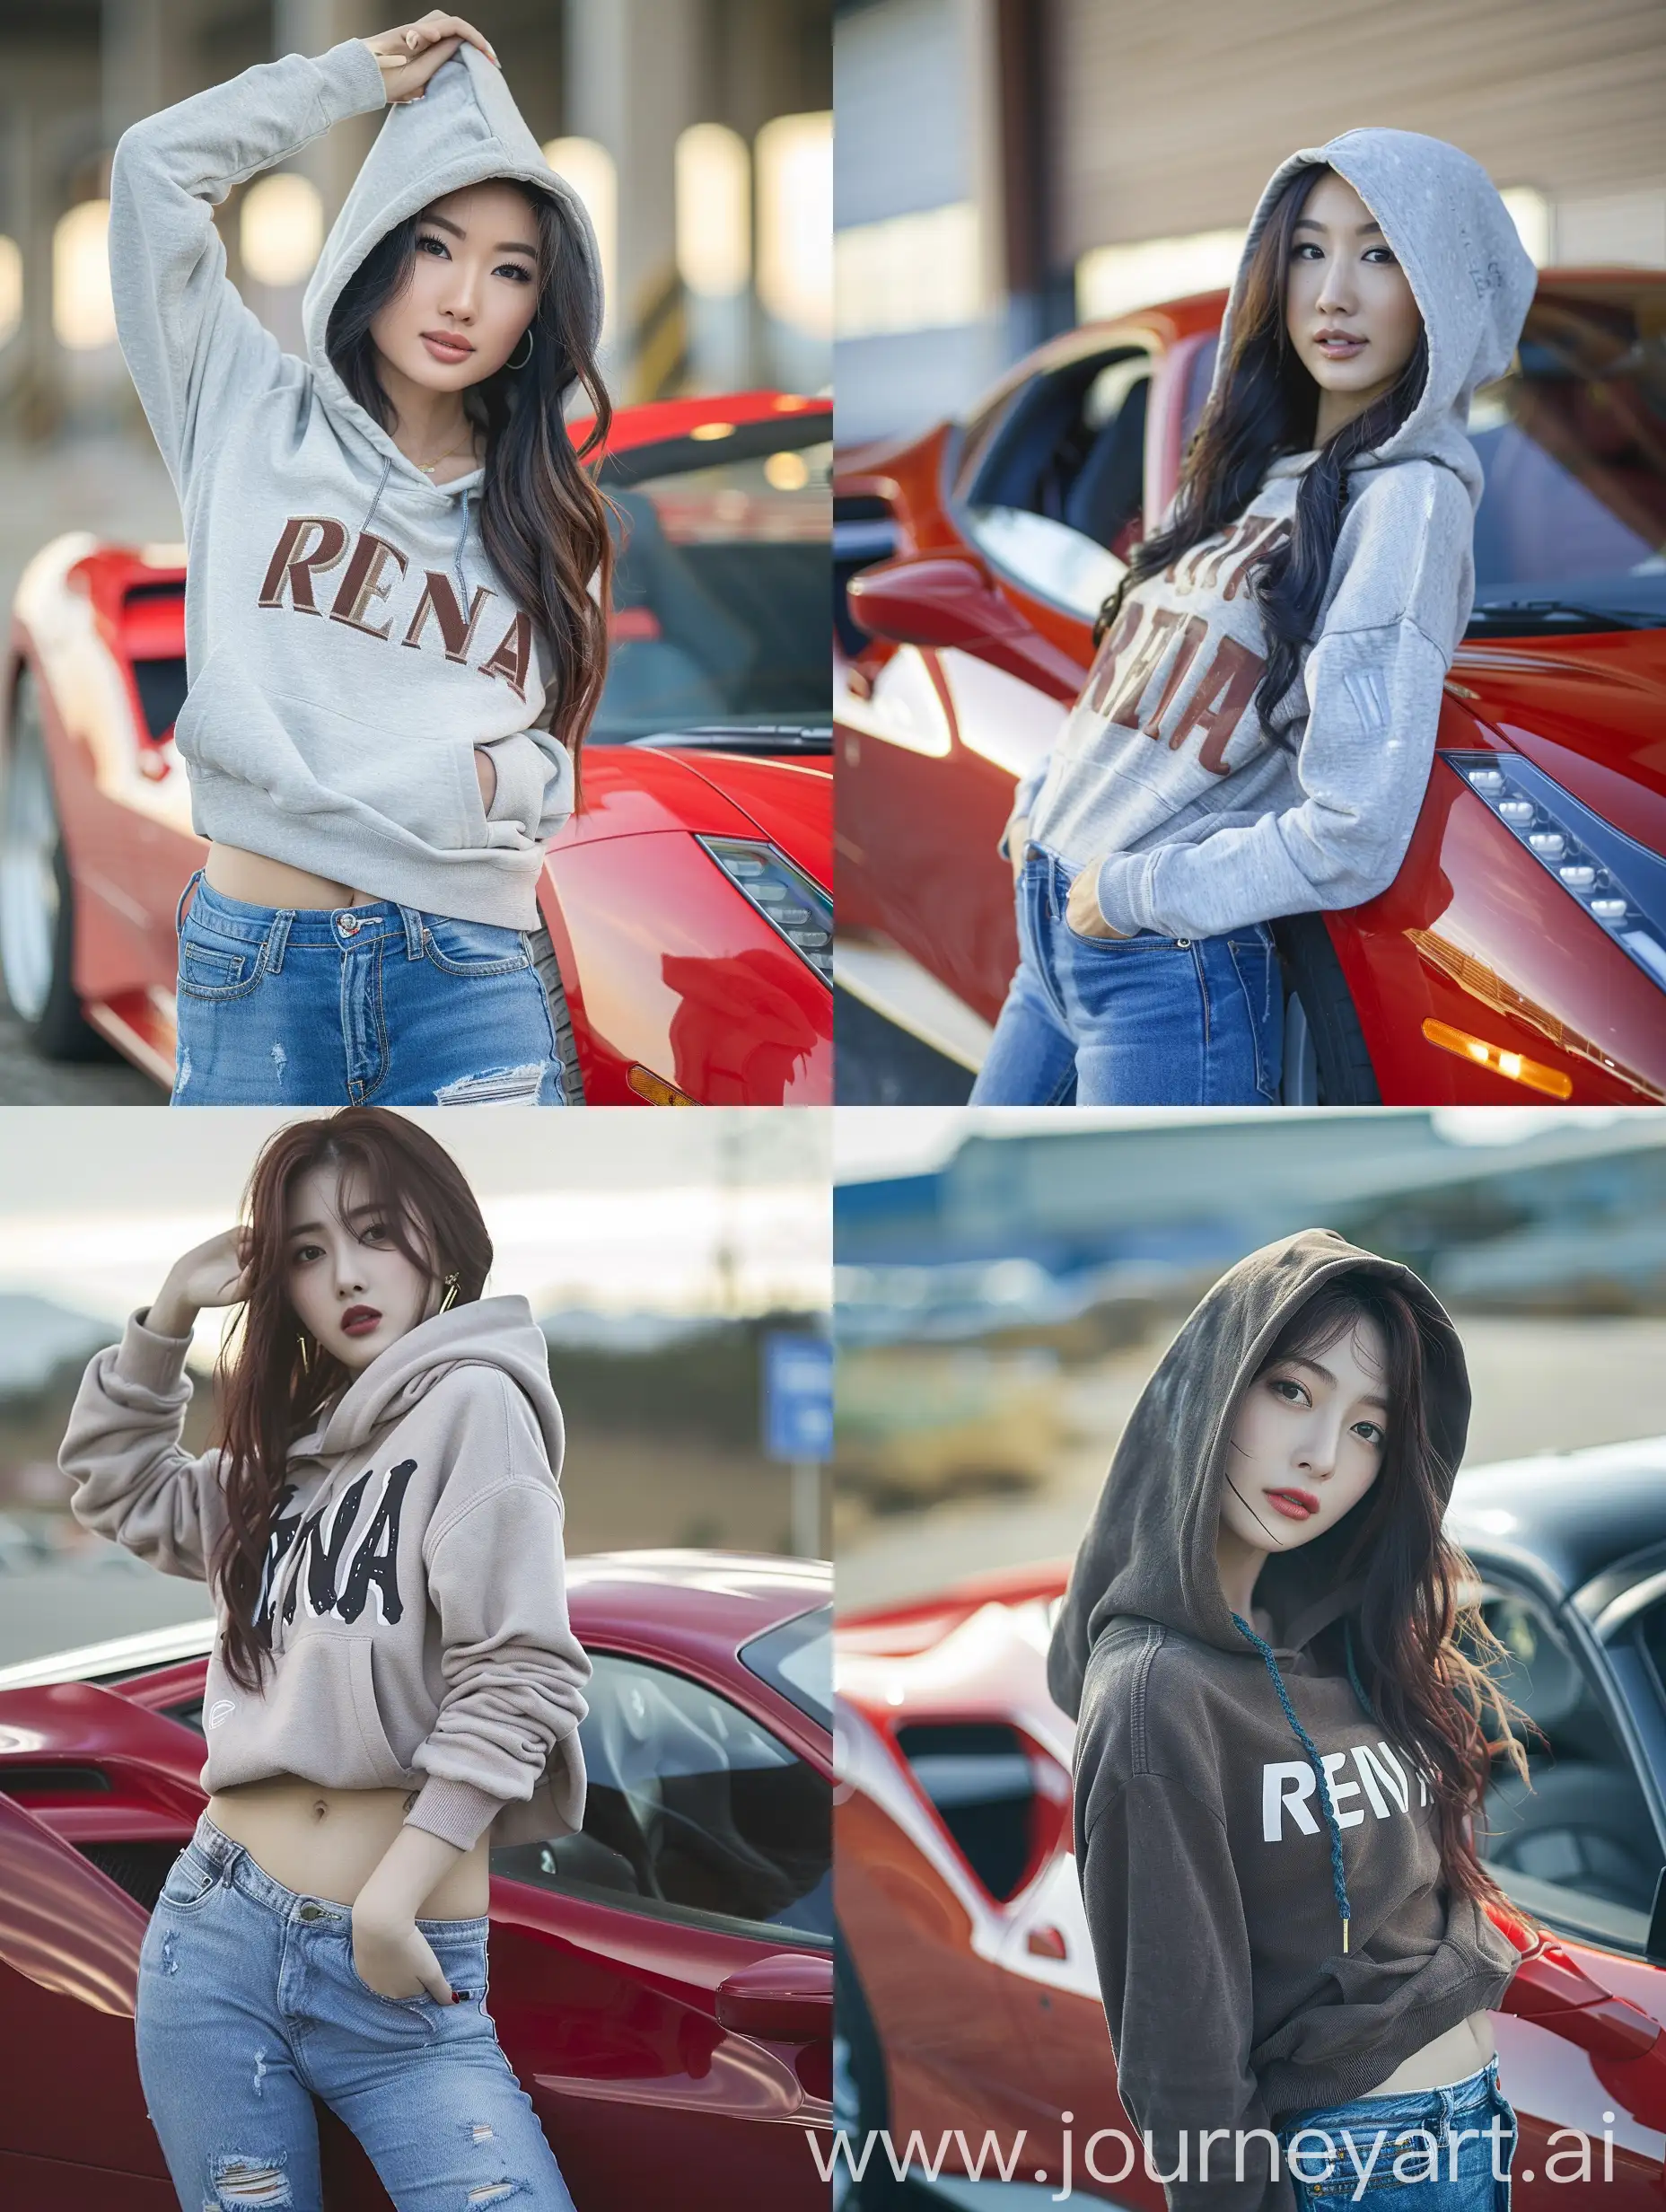 beautiful asian woman wearing a hoodie that says "RENA".jeans.posing with a Red Ferrari, amazing photography